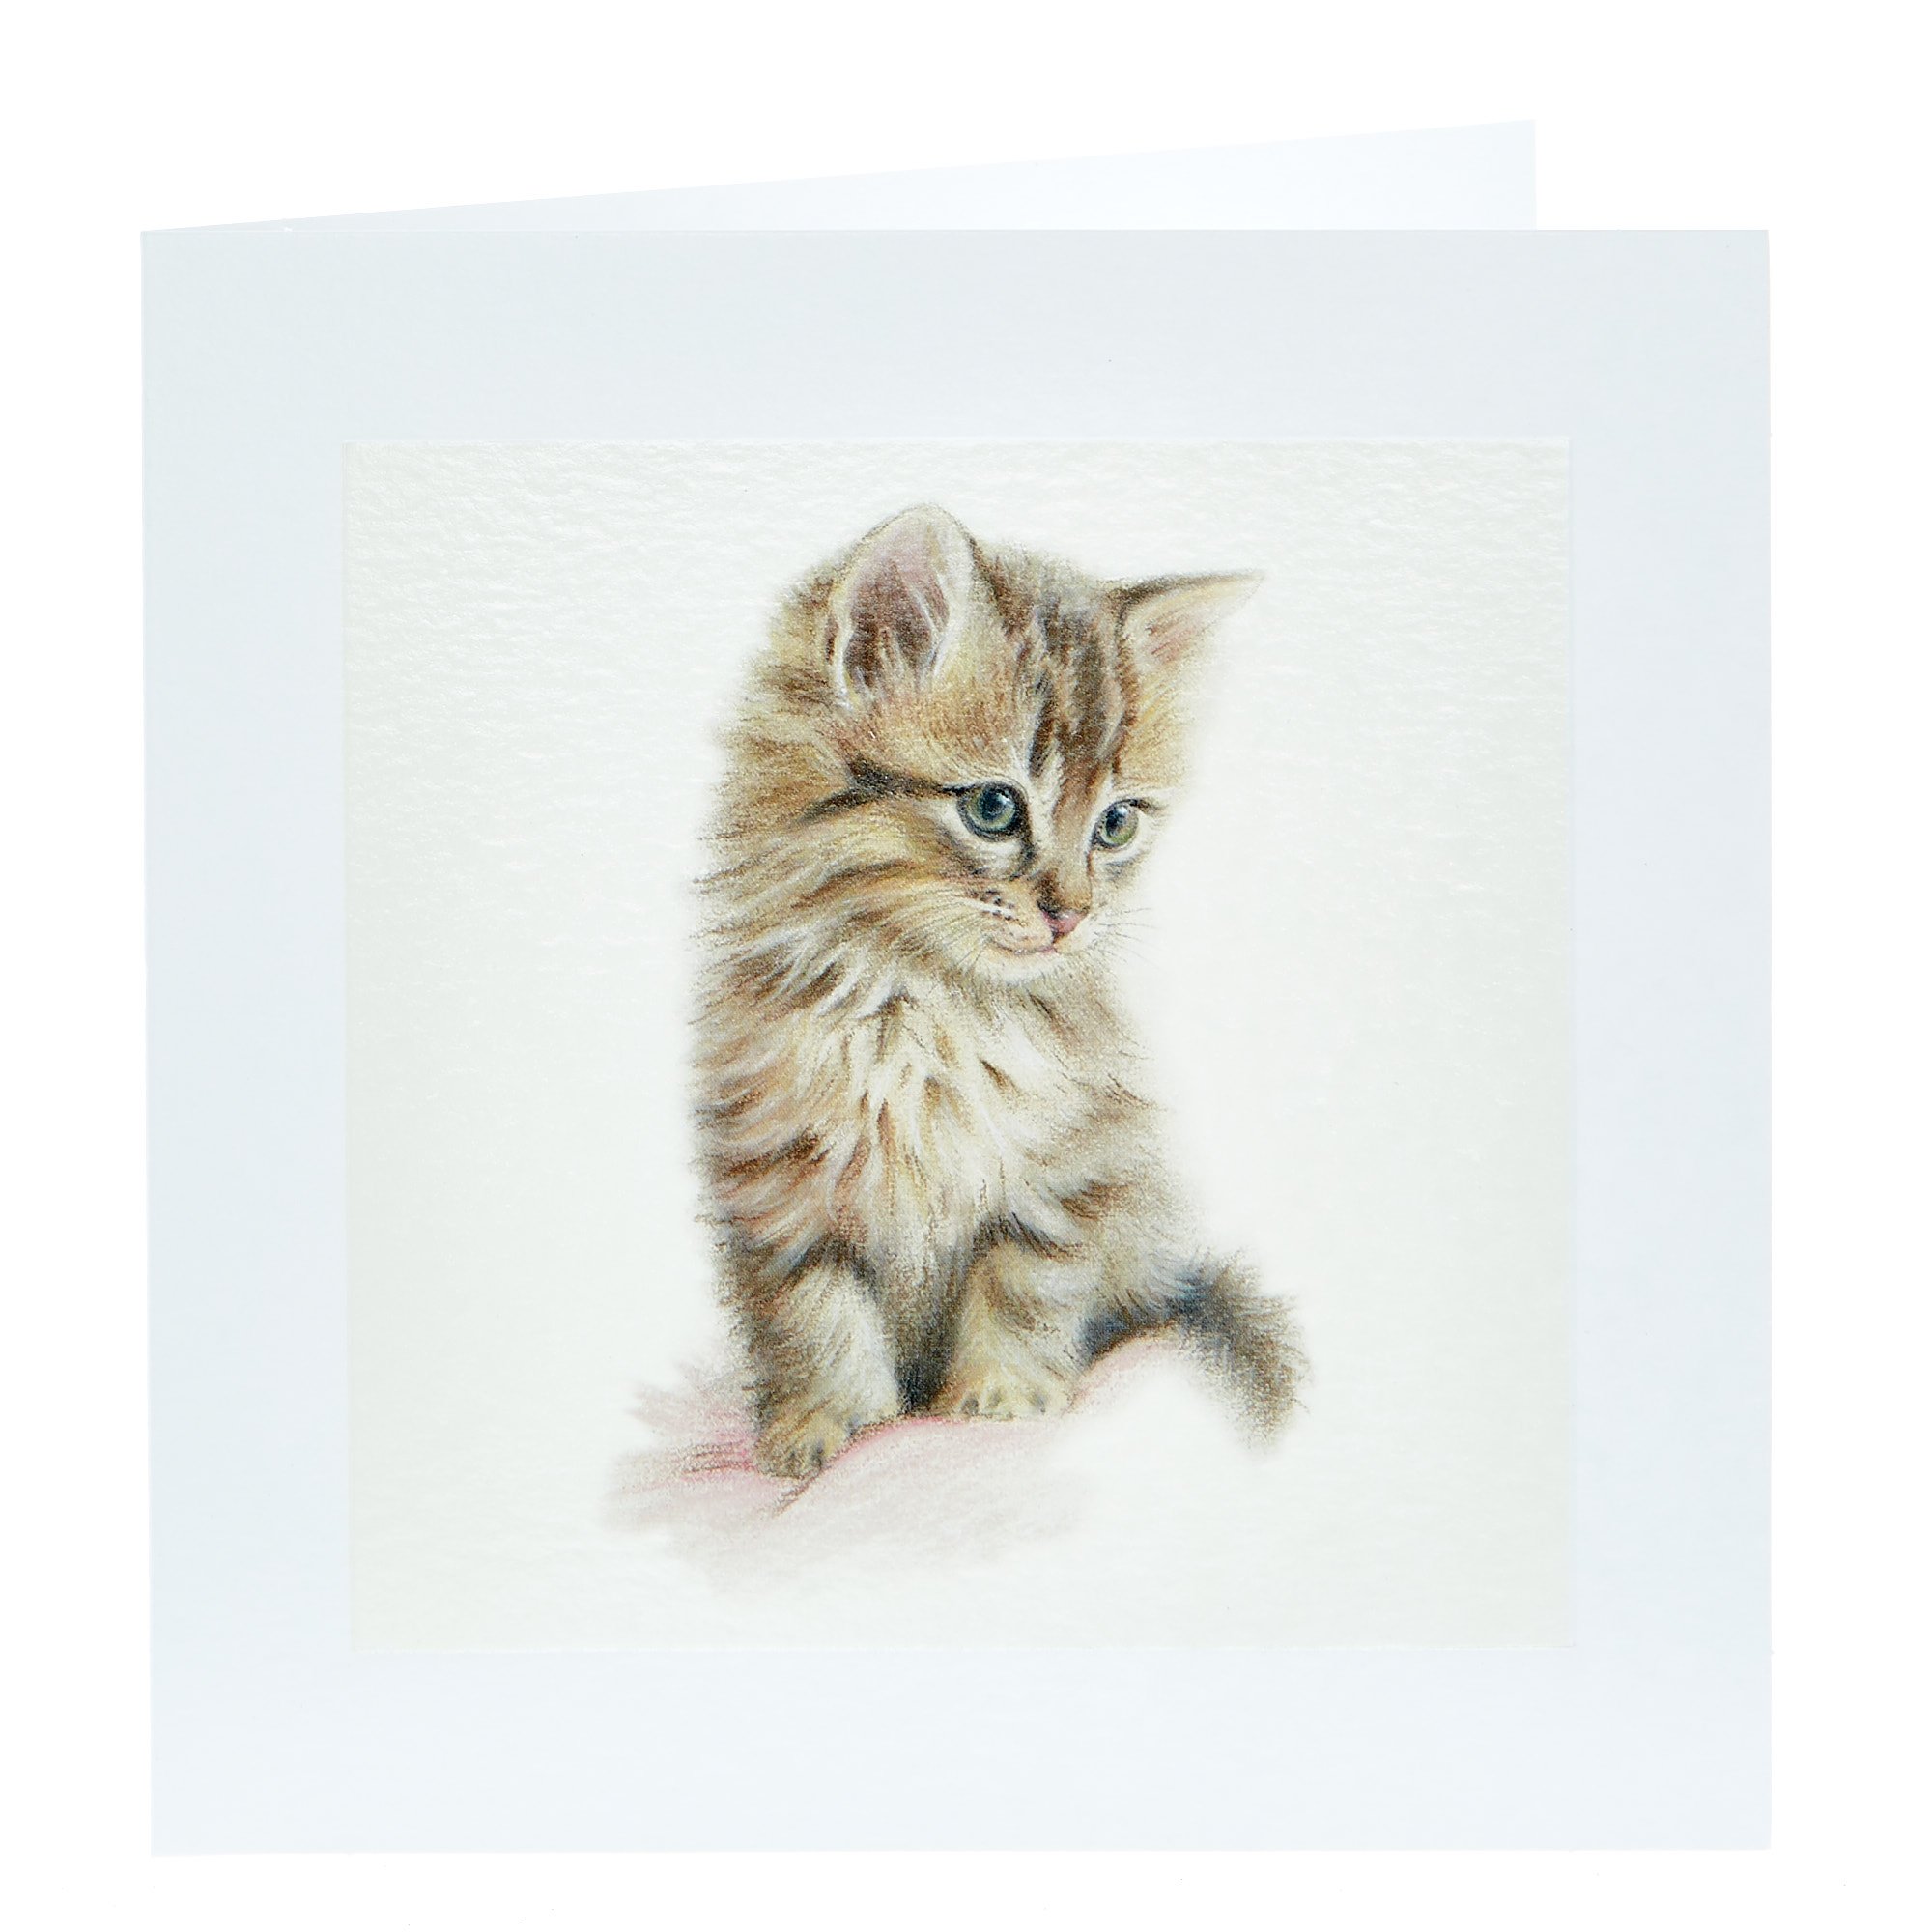 Any Occasion Card - Cute Kitten, Blank